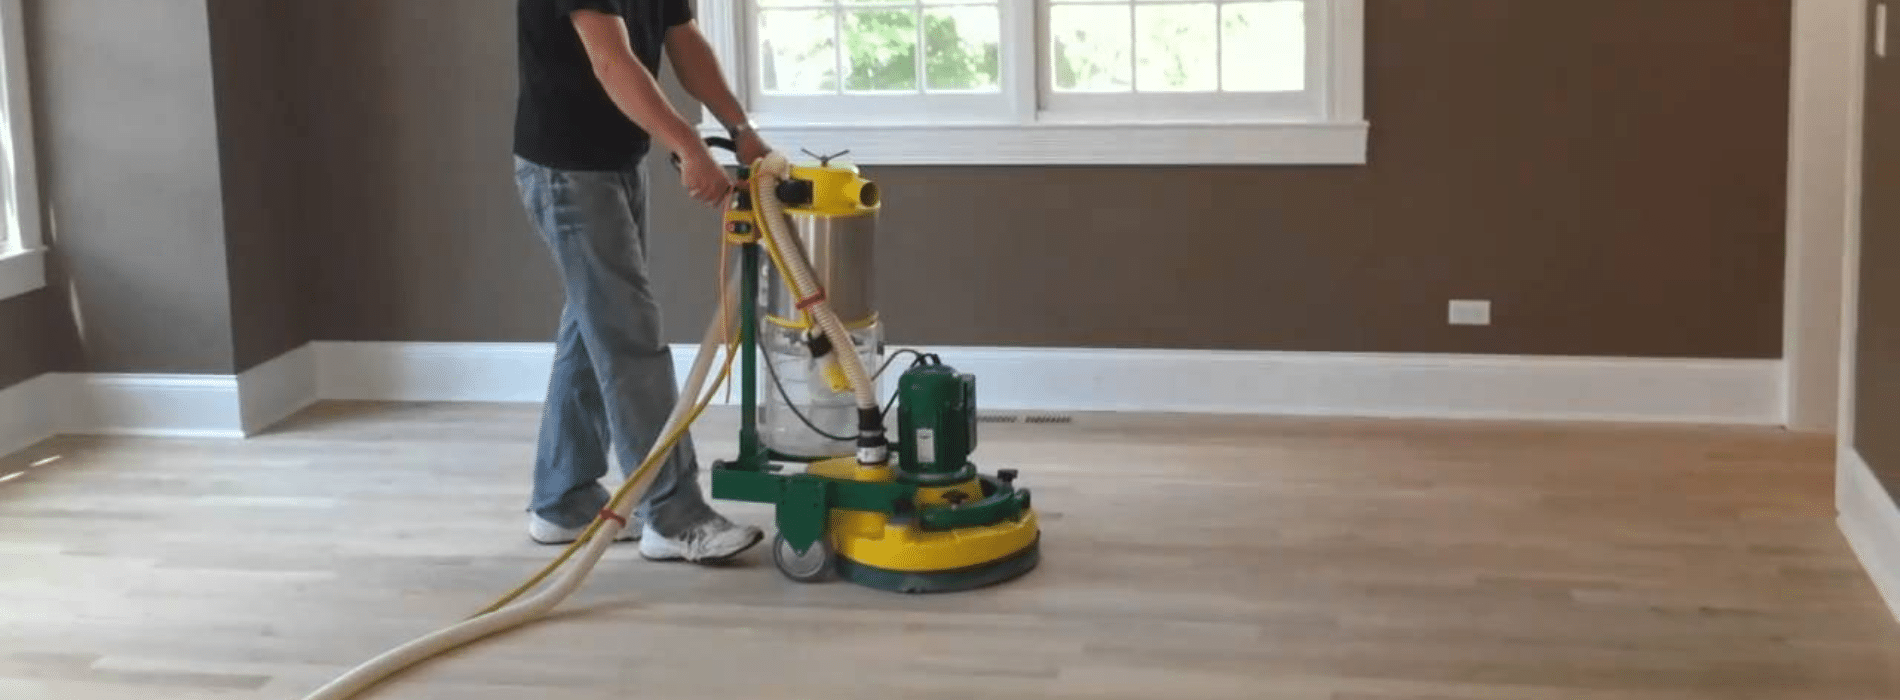 Mr Sander® Utilizing the Powerful Effect 2200 Belt Sander. Voltage: 230V, Frequency: 50Hz. Witness the Precision and Efficiency on a 200x750 mm Herringbone Floor with HEPA-Filtered Dust Extraction for a Flawless Finish.